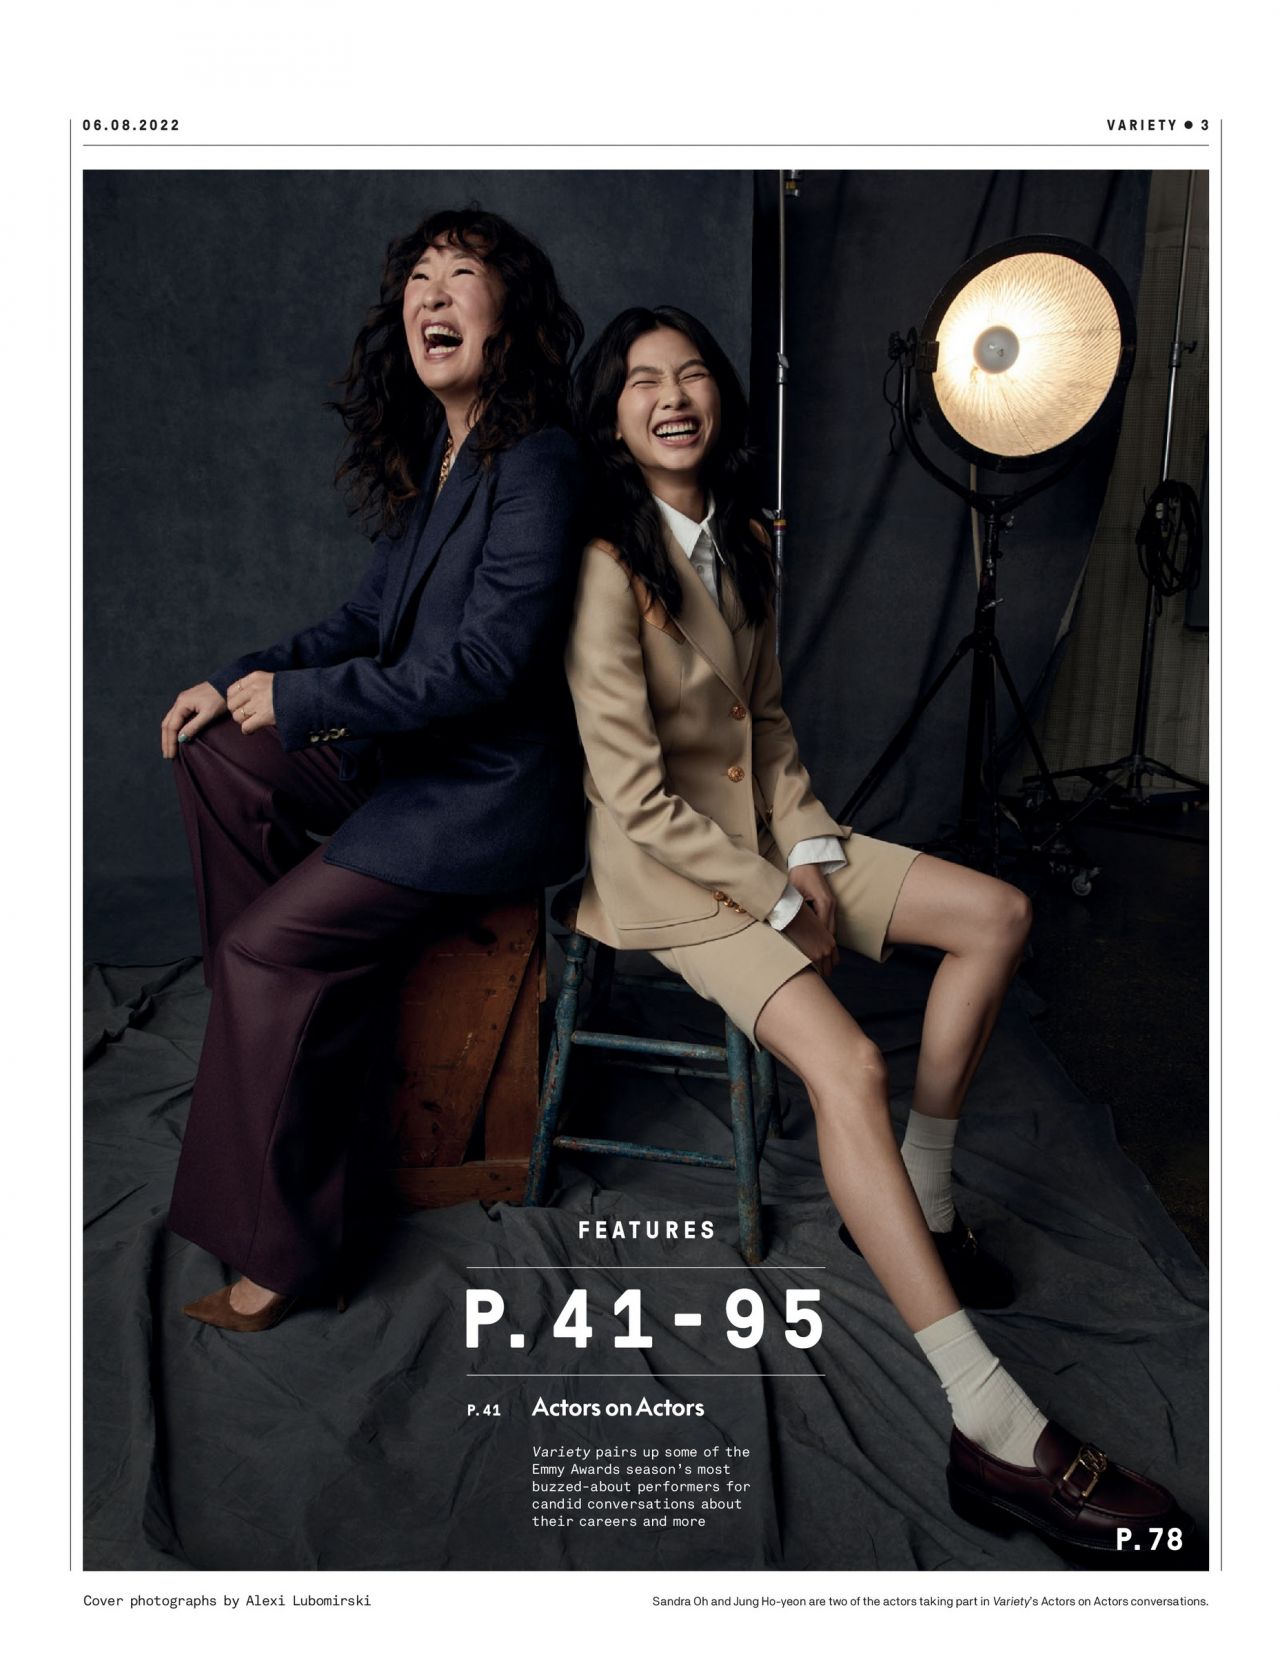 sandra-oh-and-hoyeon-jung-variety-magazine-variety-s-actors-on-actors-06-08-2022-issue-1.jpeg